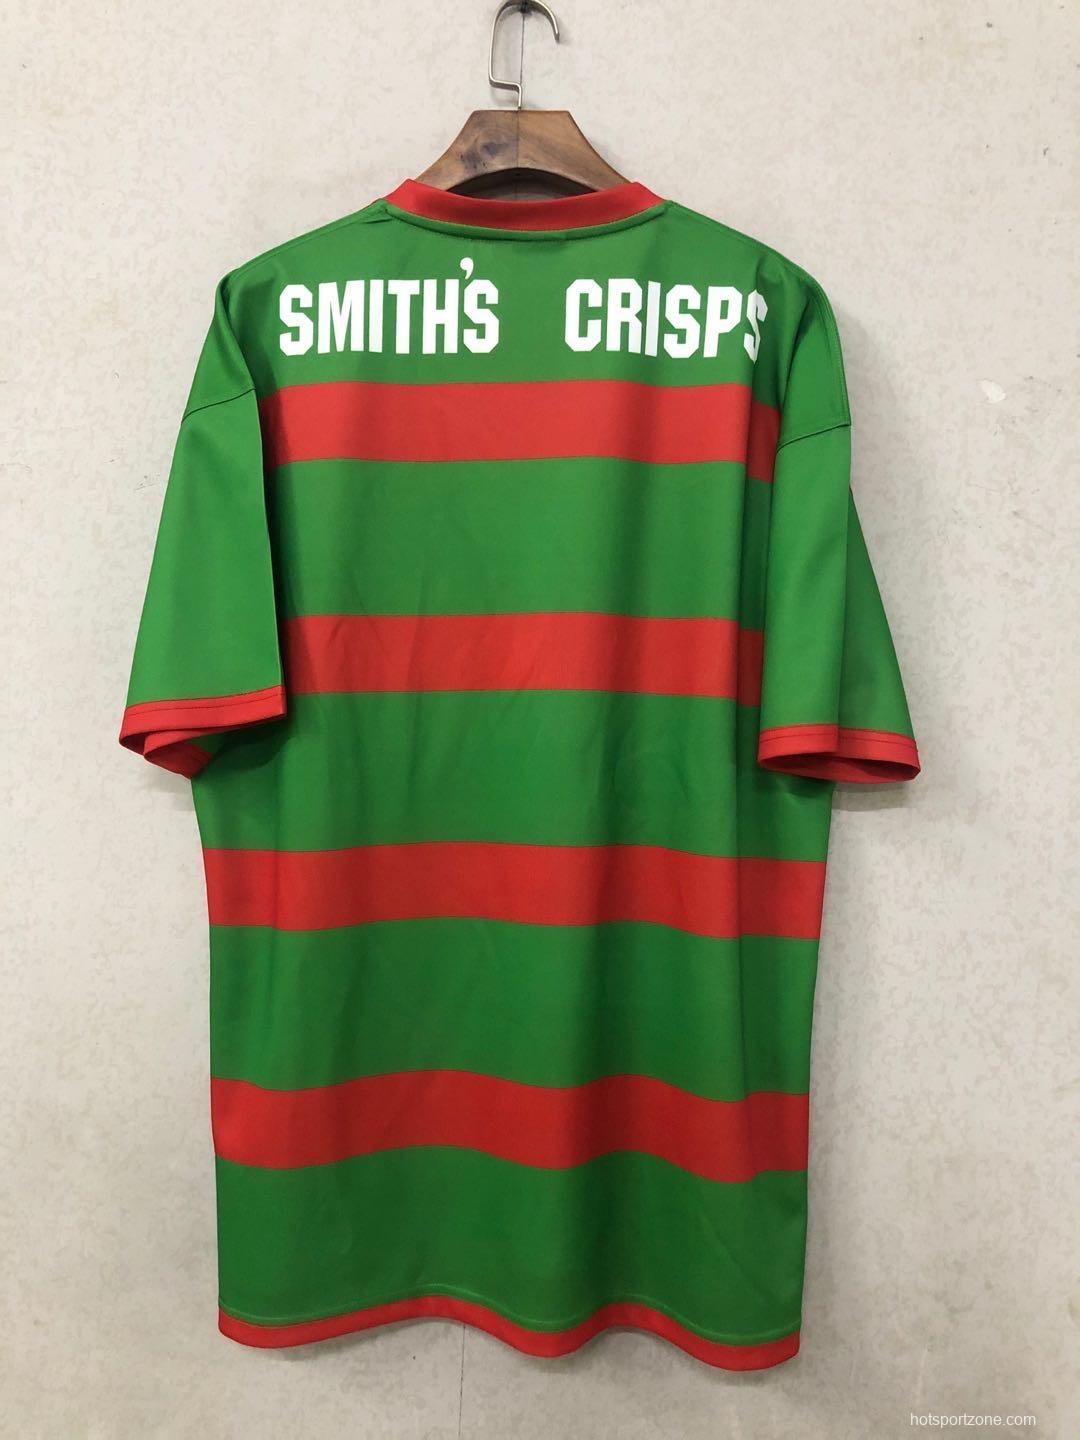 South Sydney Rabbitohs 1989 Retro Rugby Jersey